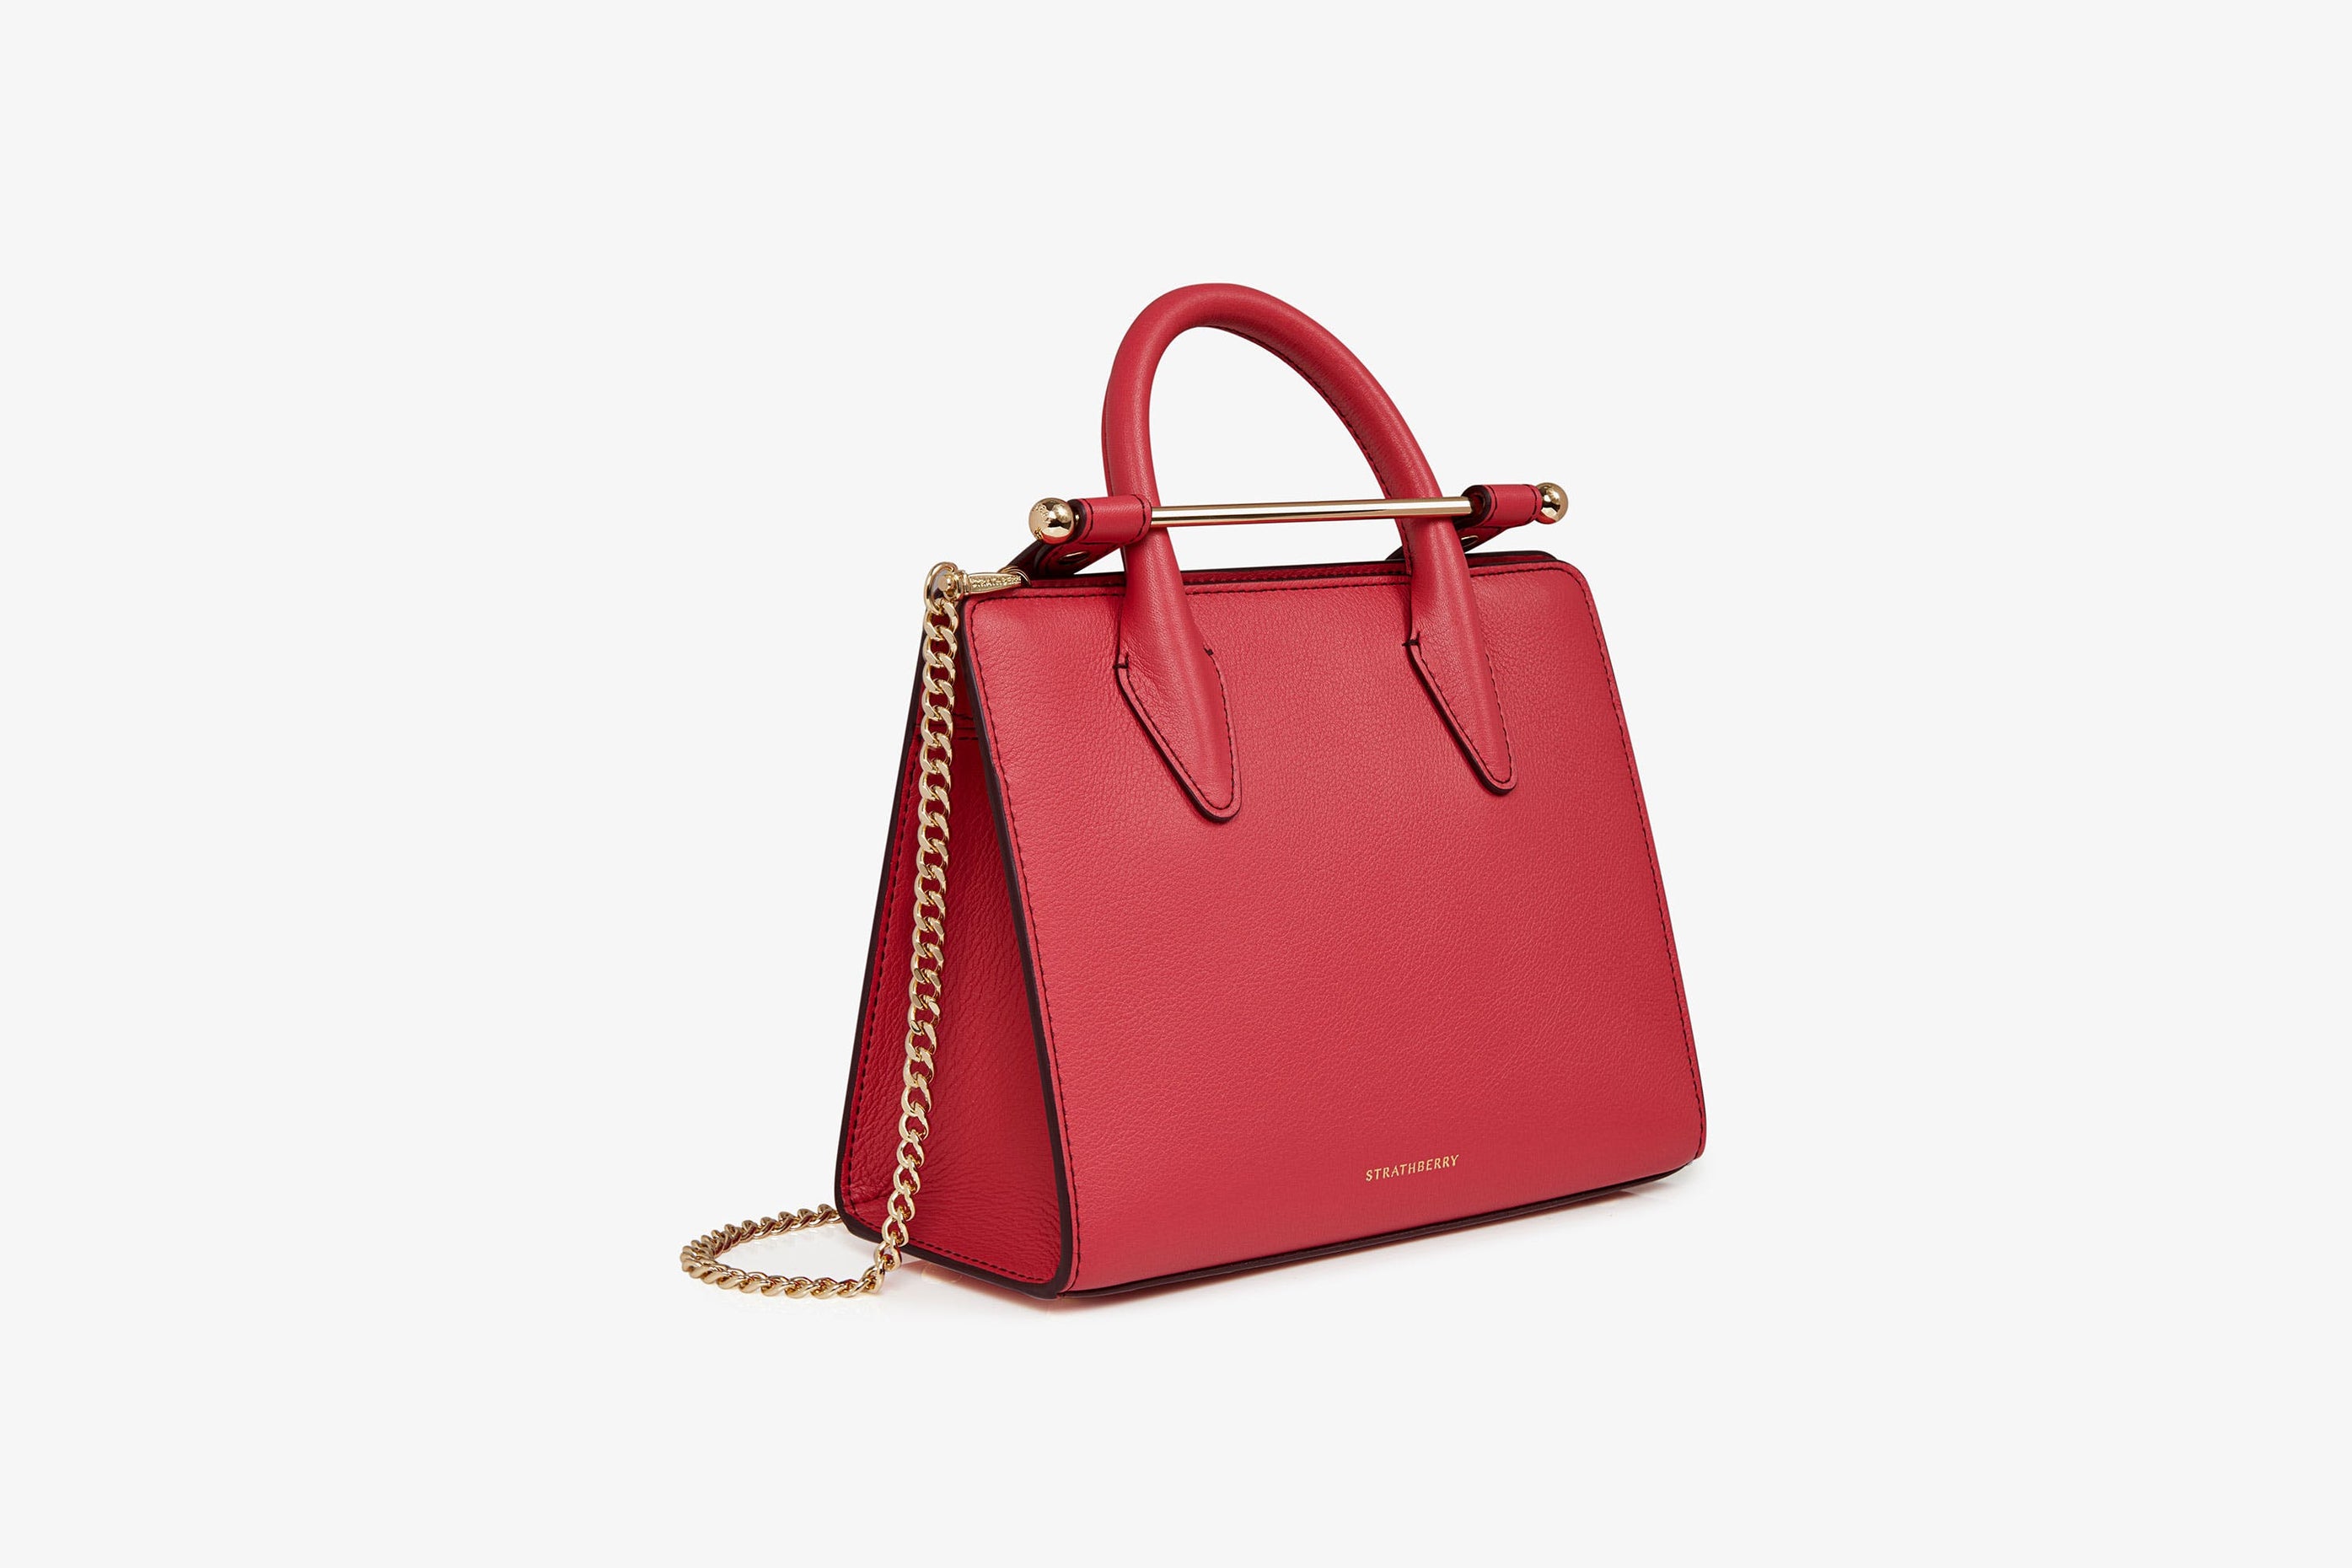 The Strathberry Mini Tote - Red | Strathberry